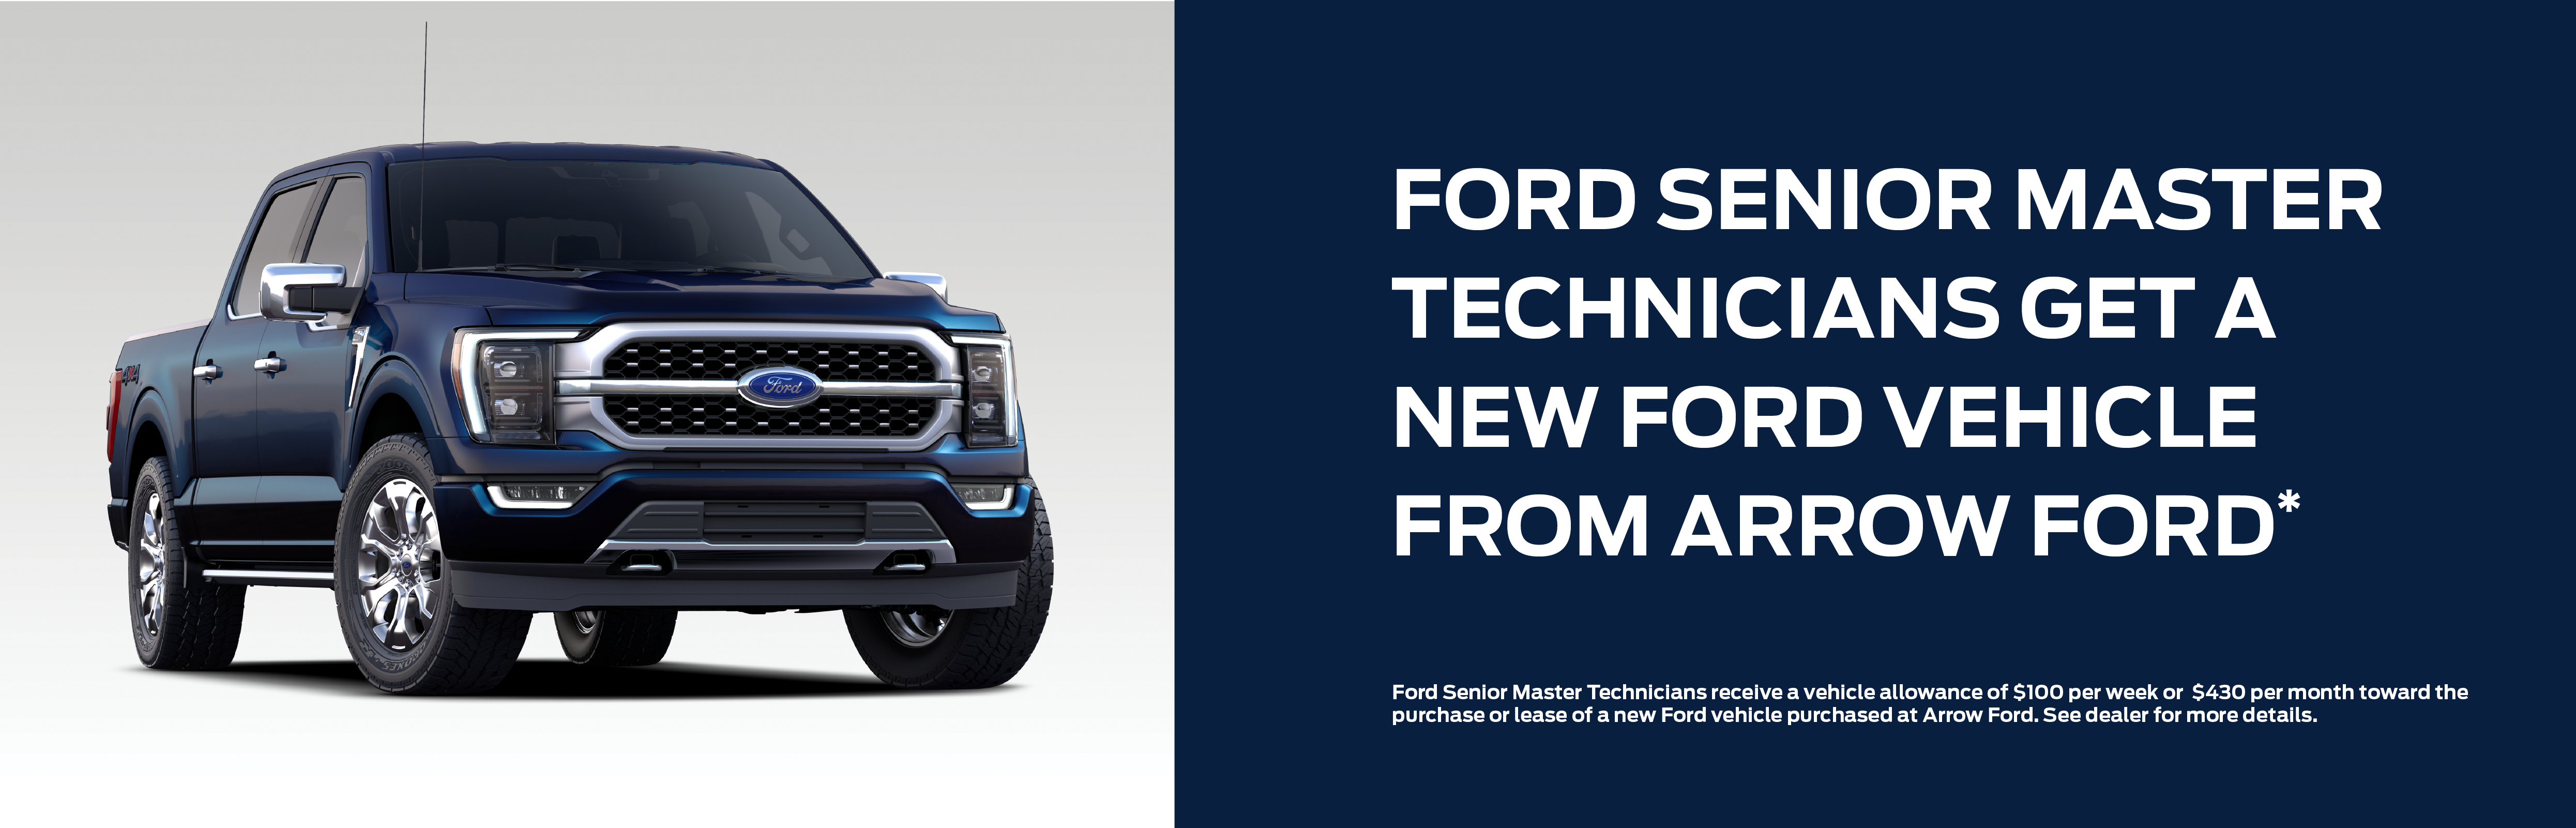 Ford Senior Master Technicians get a new Ford vehicle from Arrow Ford